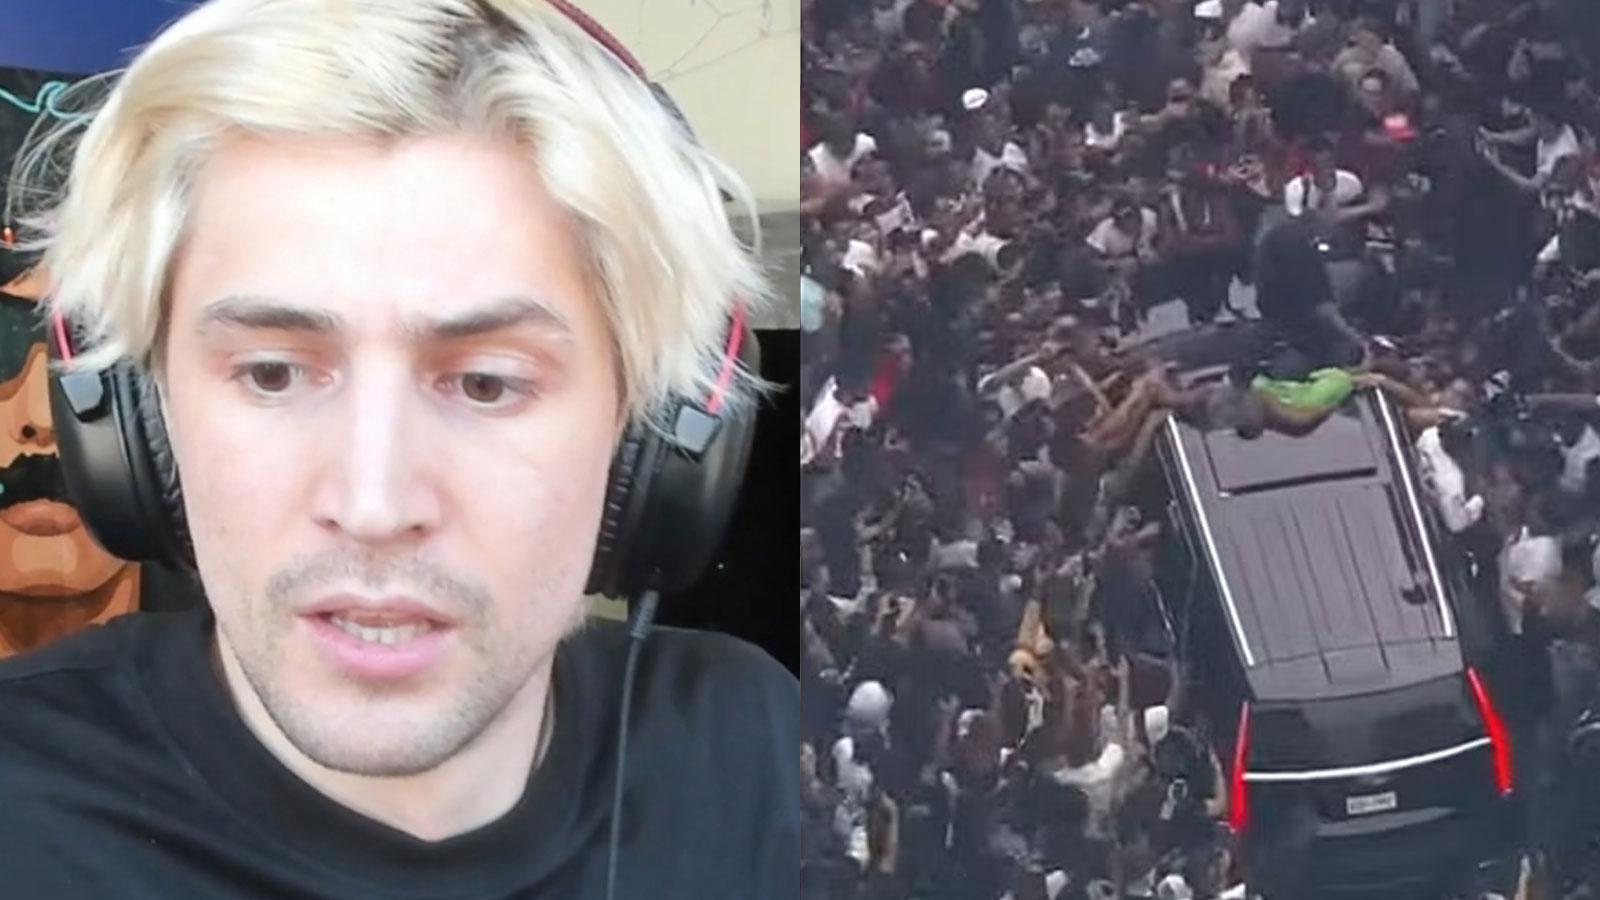 Twitch streamer xQc and birdseye view of Kai Cenat's riot at Union Square